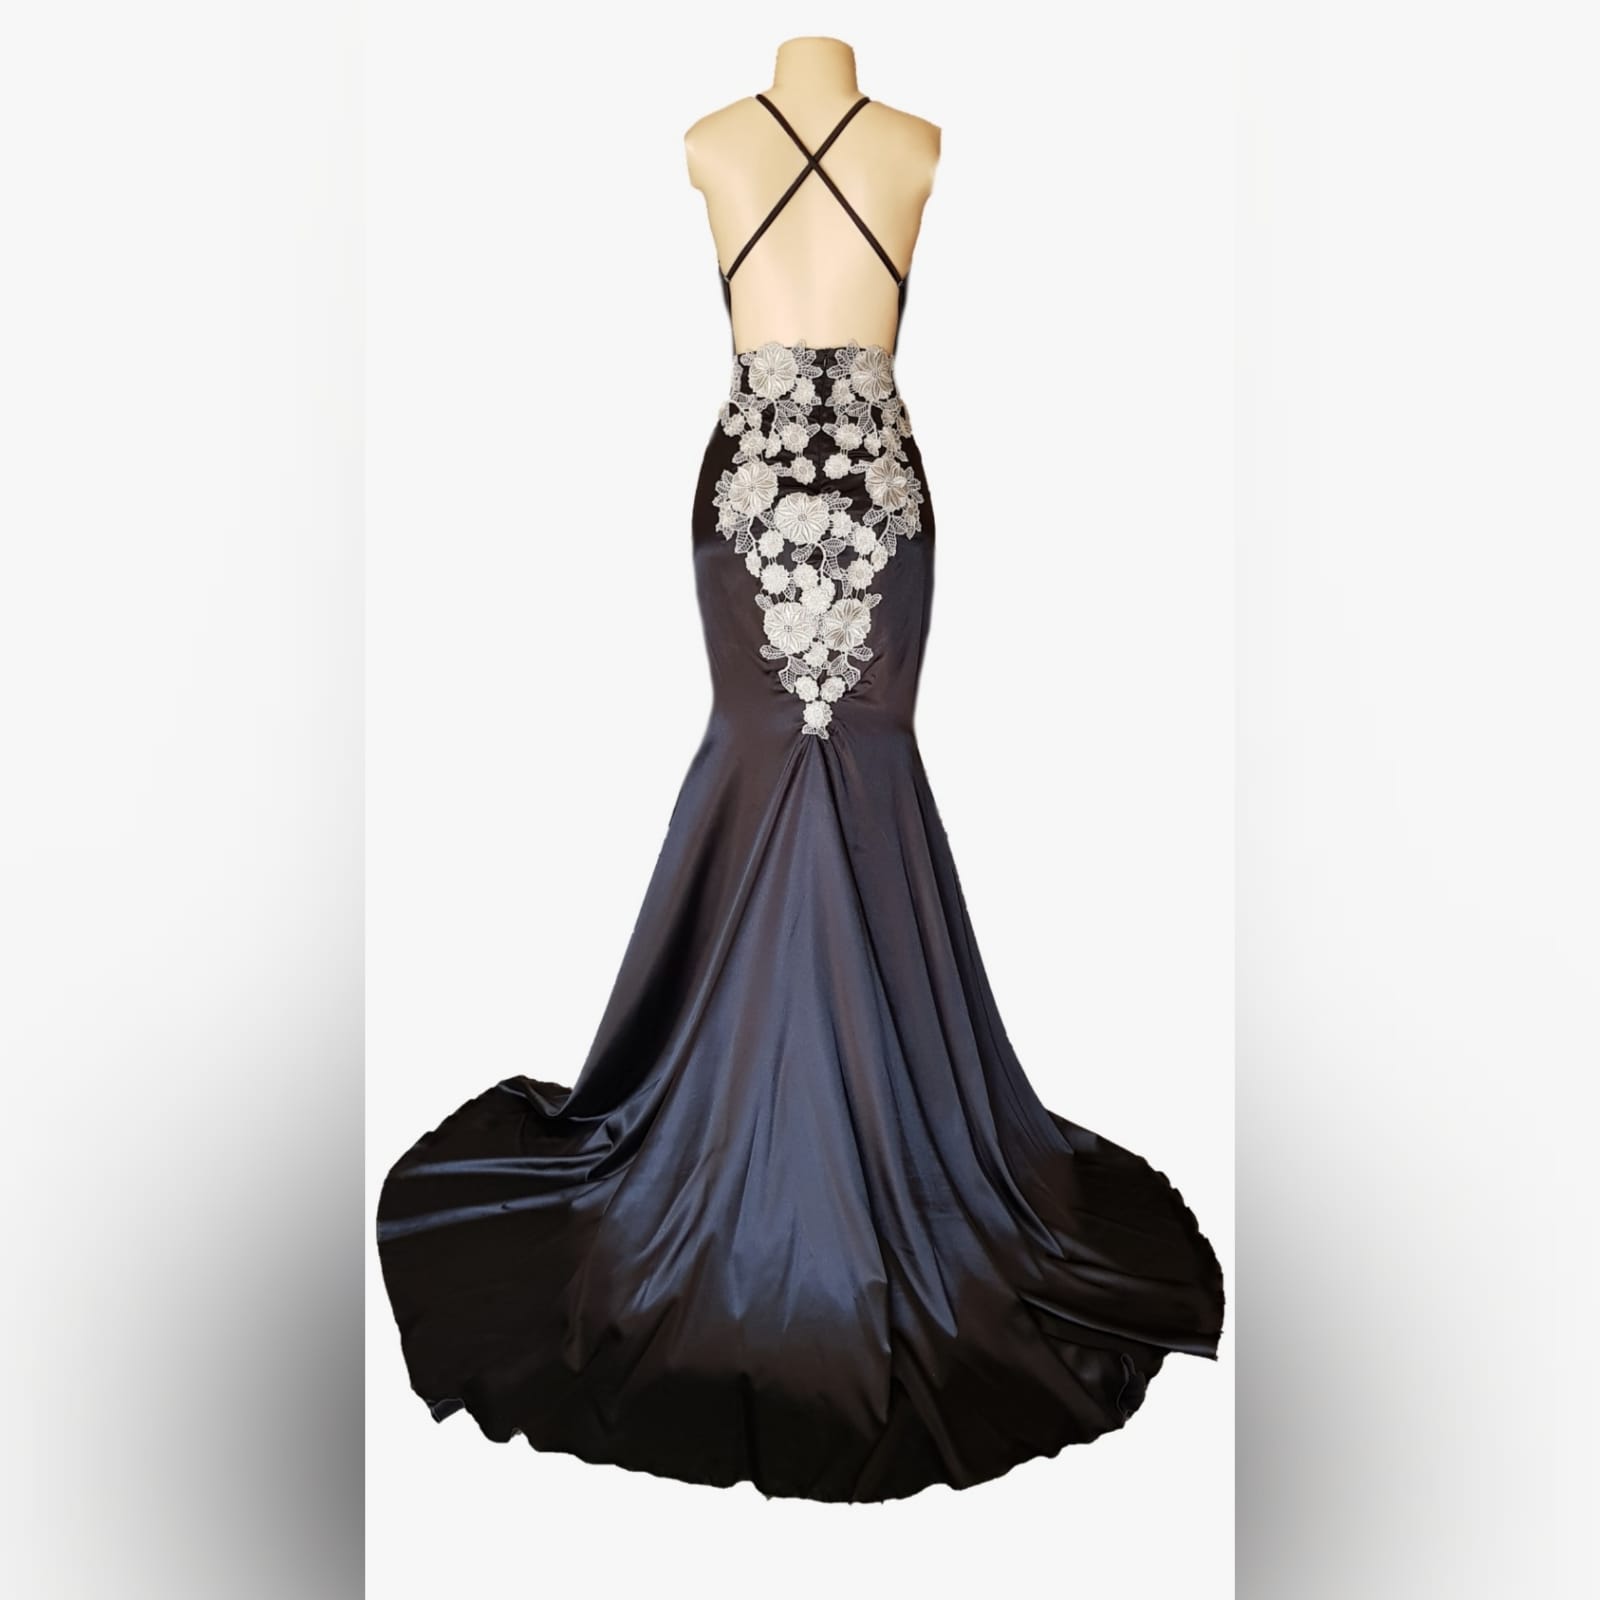 Black satin long fitted prom dress 5 a black satin long fitted prom dress with silver lace detail, will add an elegance to your special event.